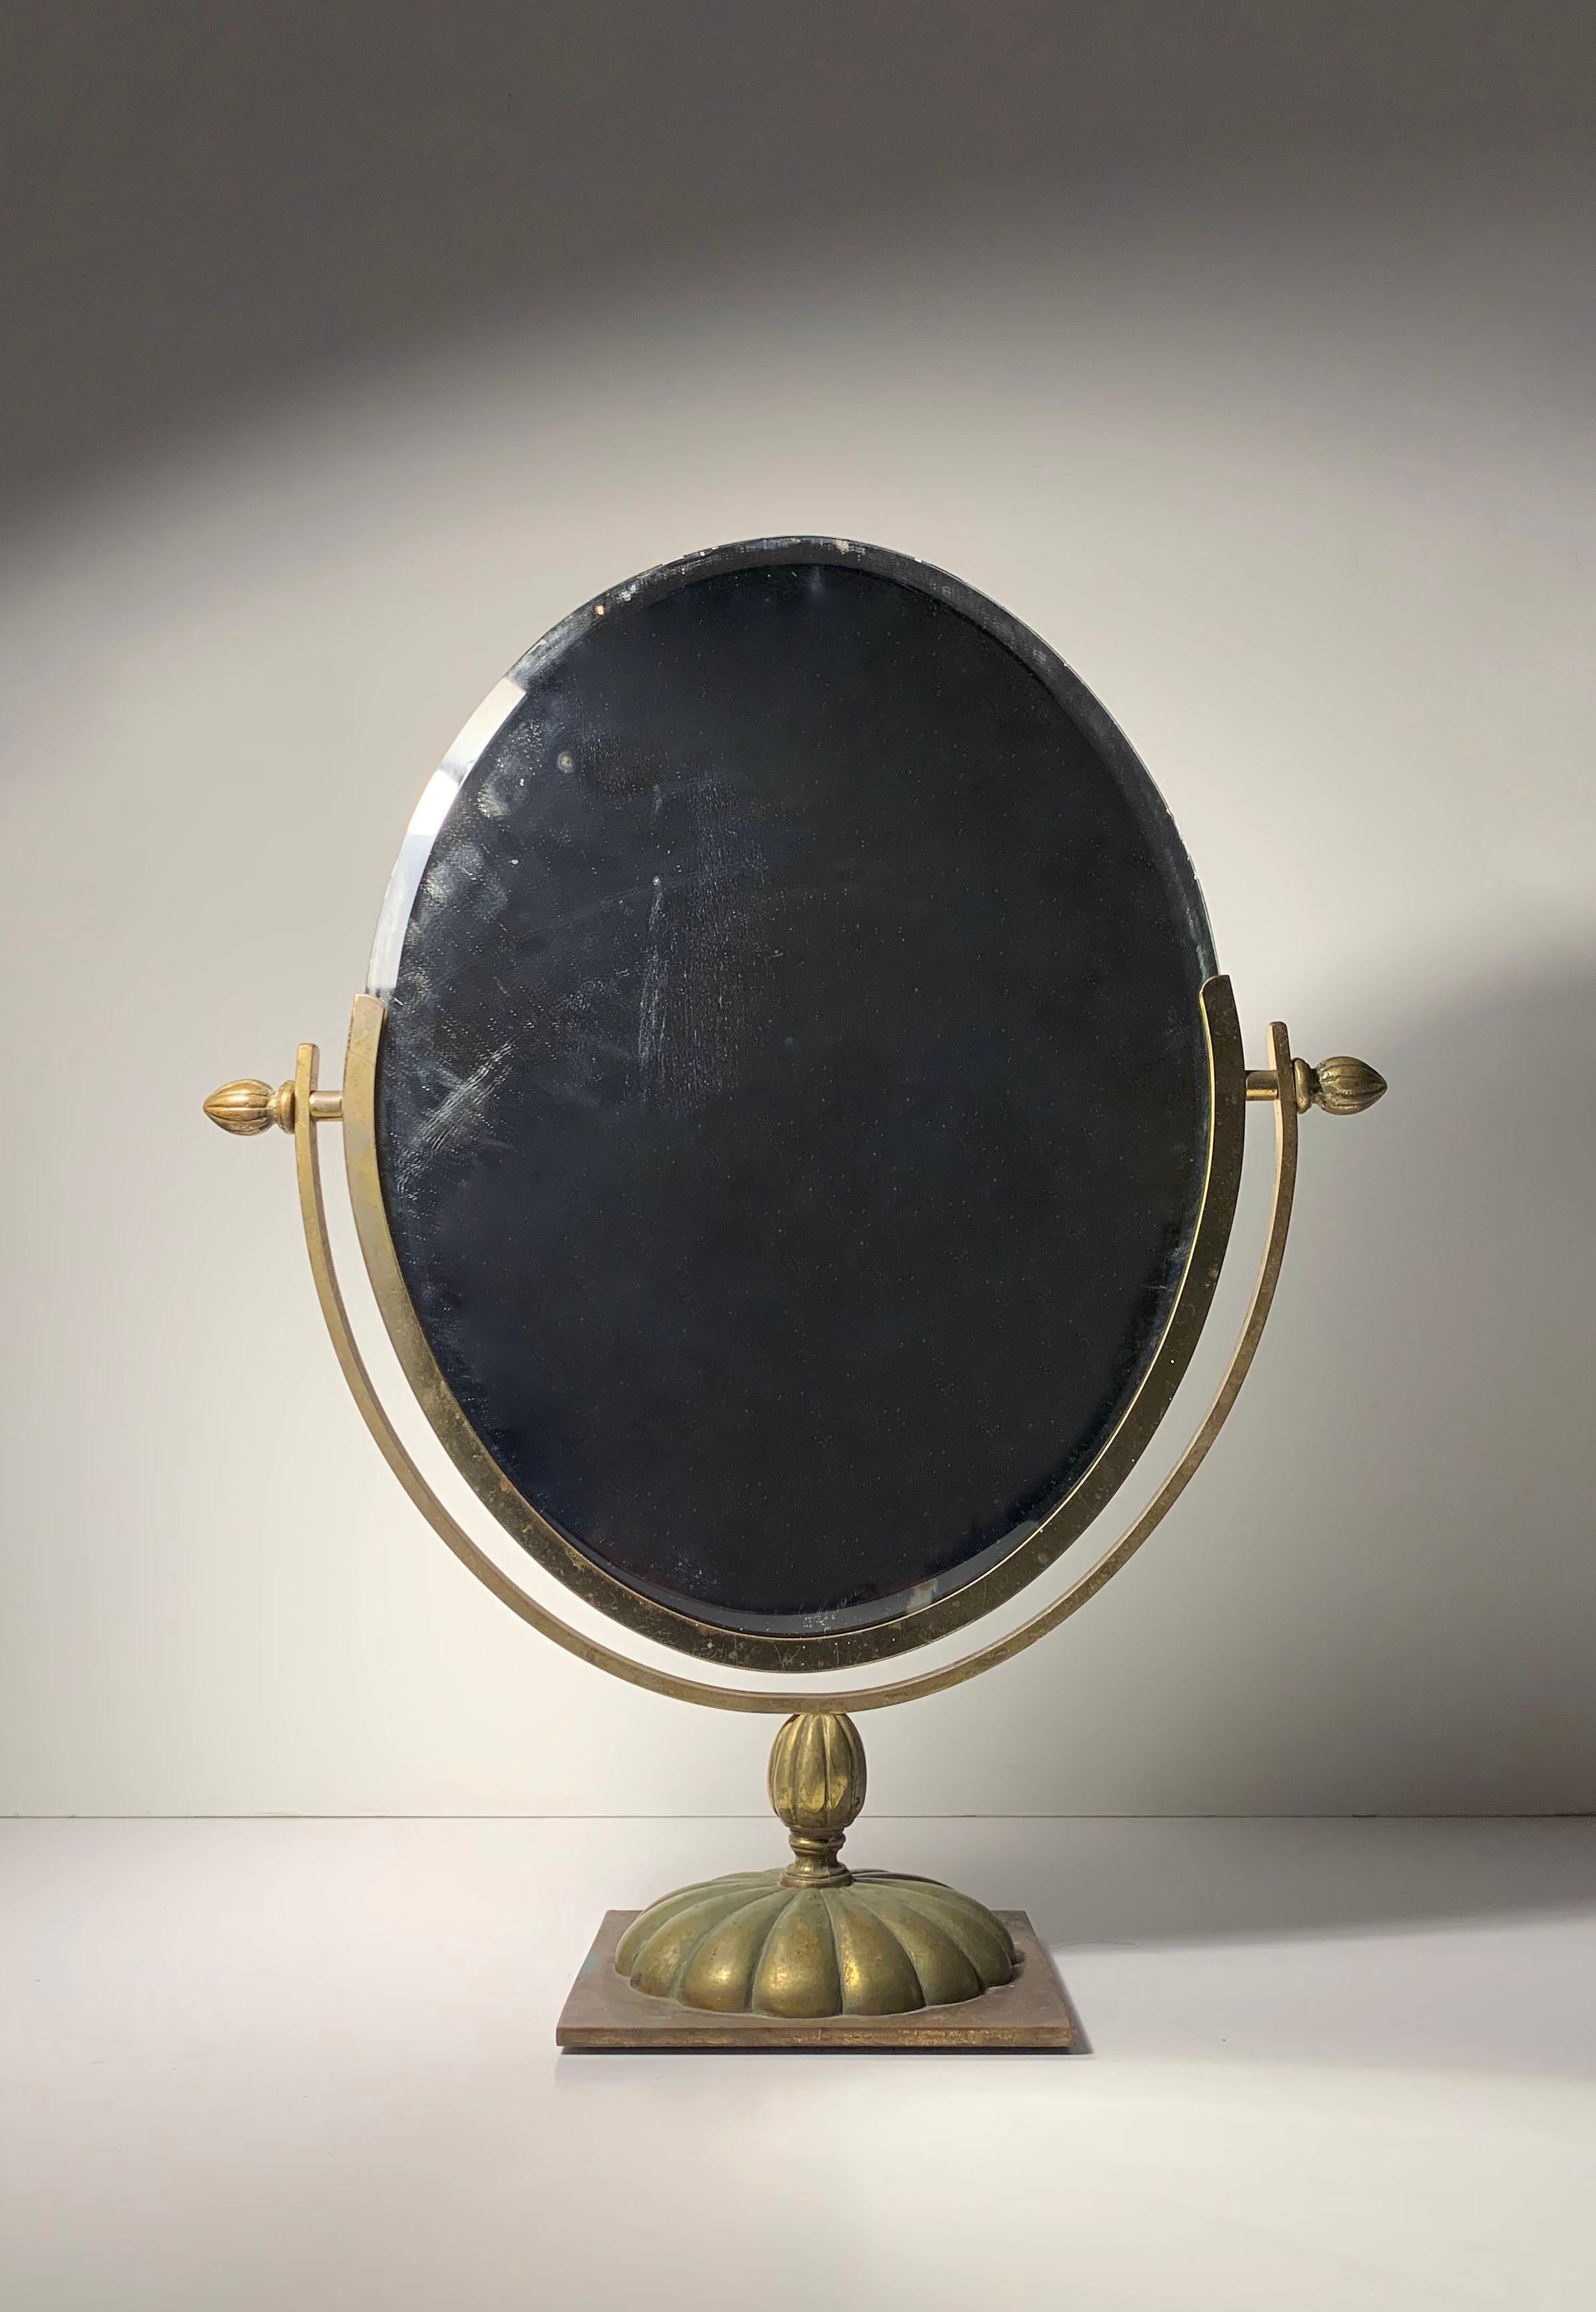 A nice early vintage brass vanity table mirror. Uncertain to origin. May possibly be Italian. It appears to have a fair amount of handcrafted components. Nice early molds for the brass castings. A nice heavy piece. The mirror shows a lot of age with